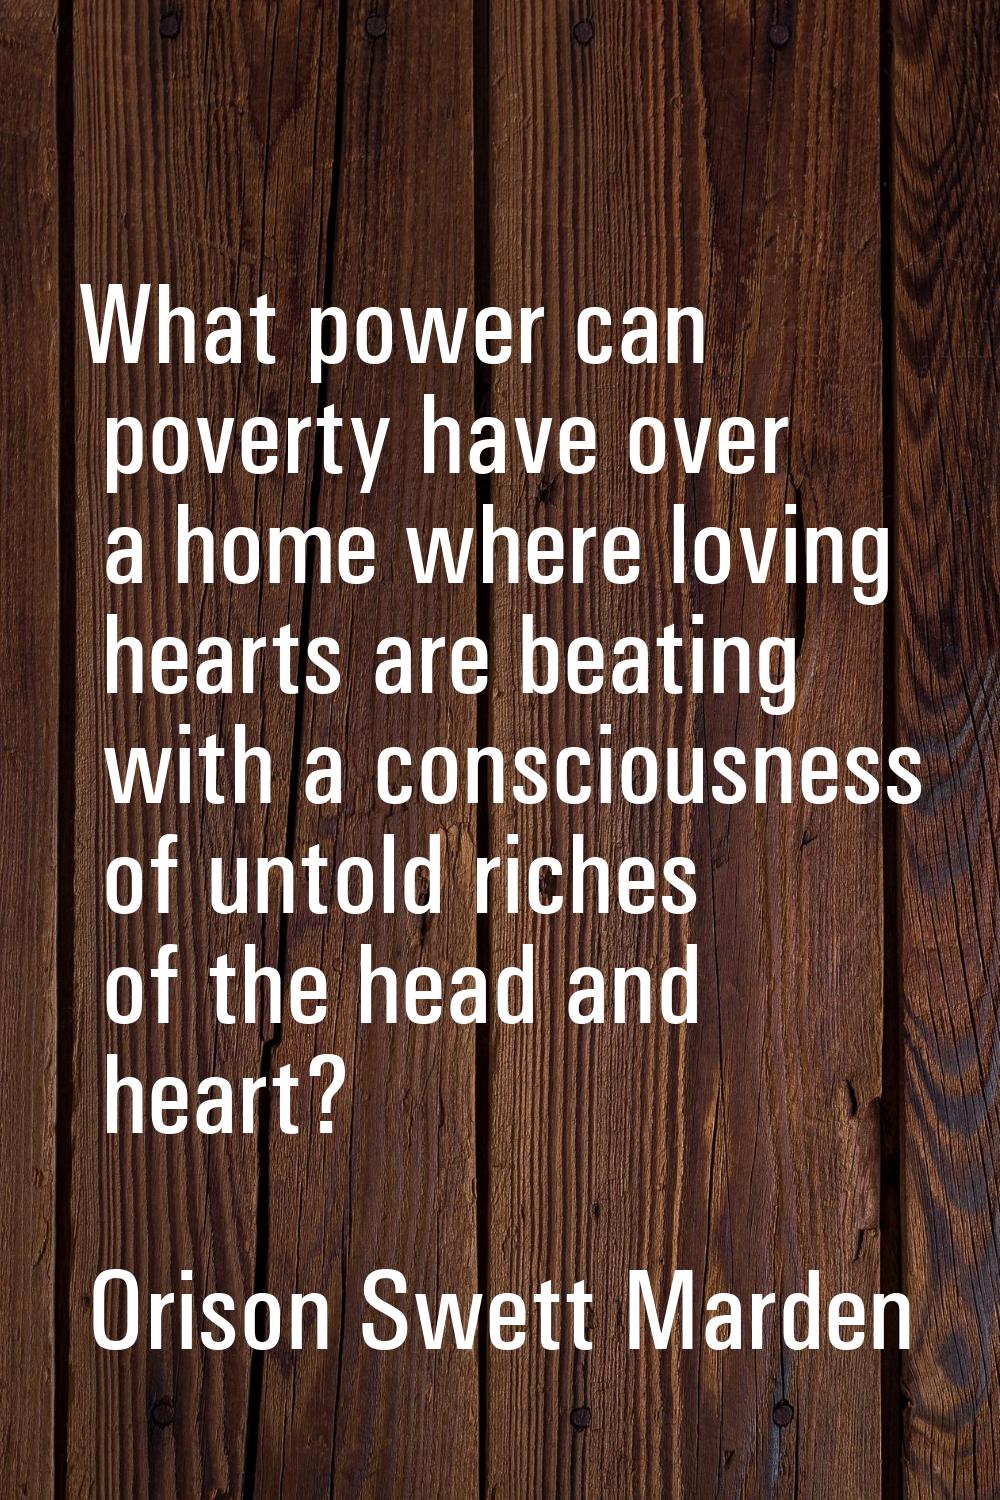 What power can poverty have over a home where loving hearts are beating with a consciousness of unt